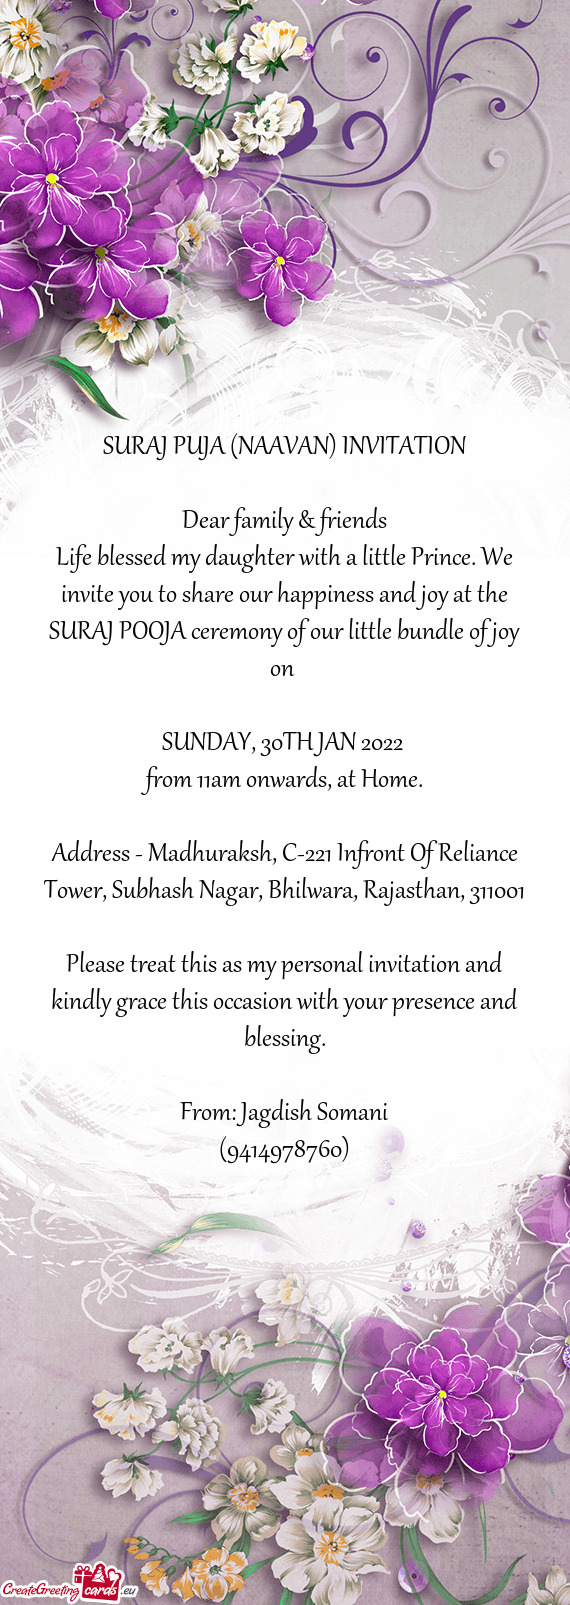 Life blessed my daughter with a little Prince. We invite you to share our happiness and joy at the S